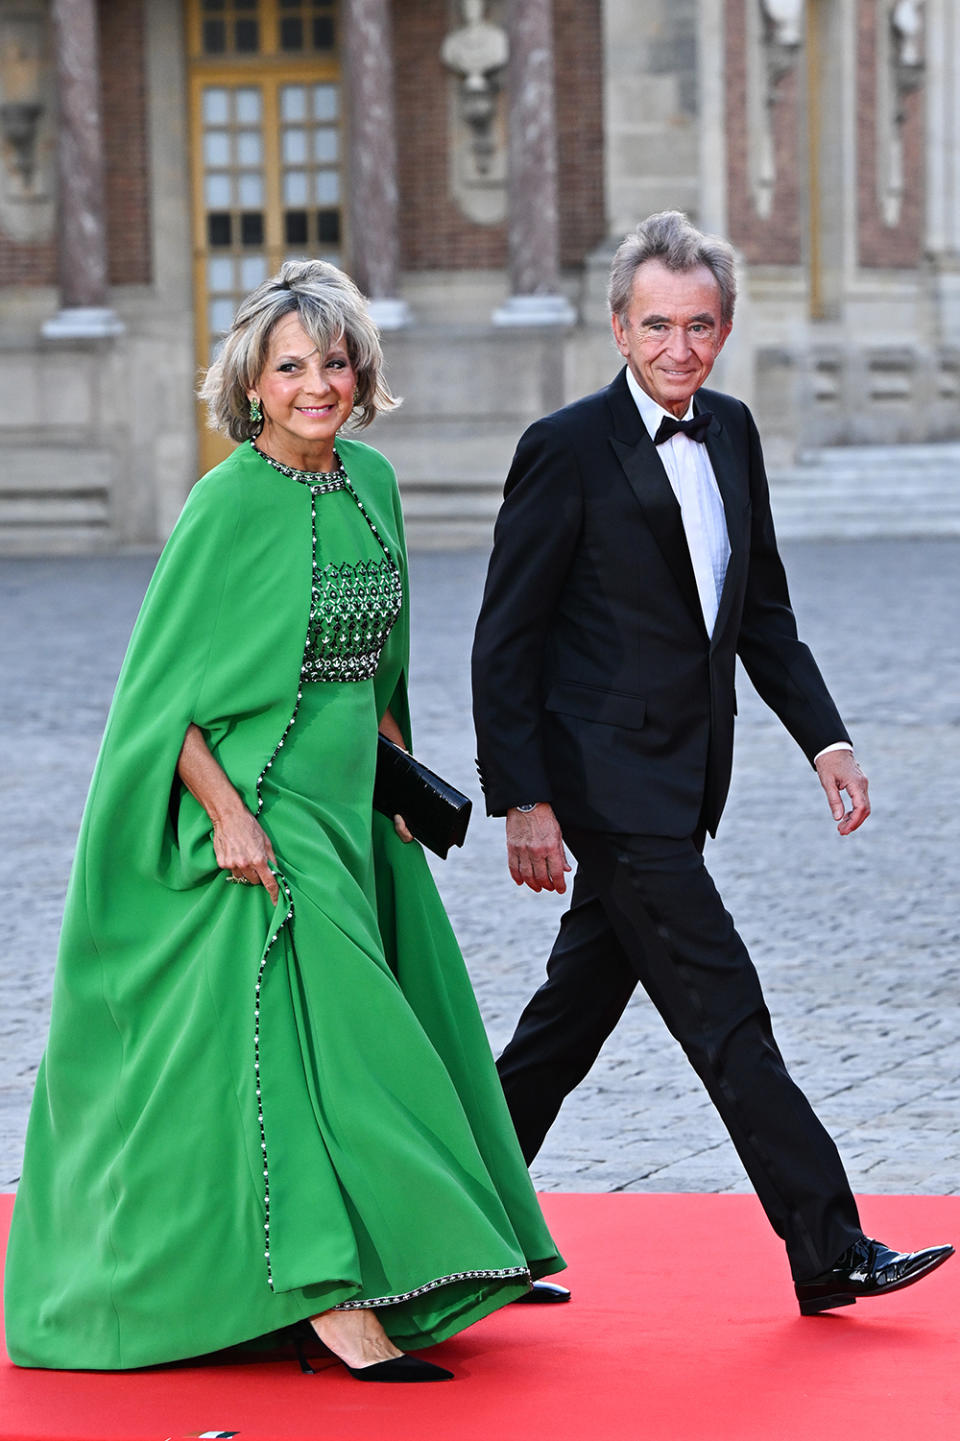 elene Mercier and Bernard Arnault arrive at the Palace of Versailles ahead of the State Dinner on September 20